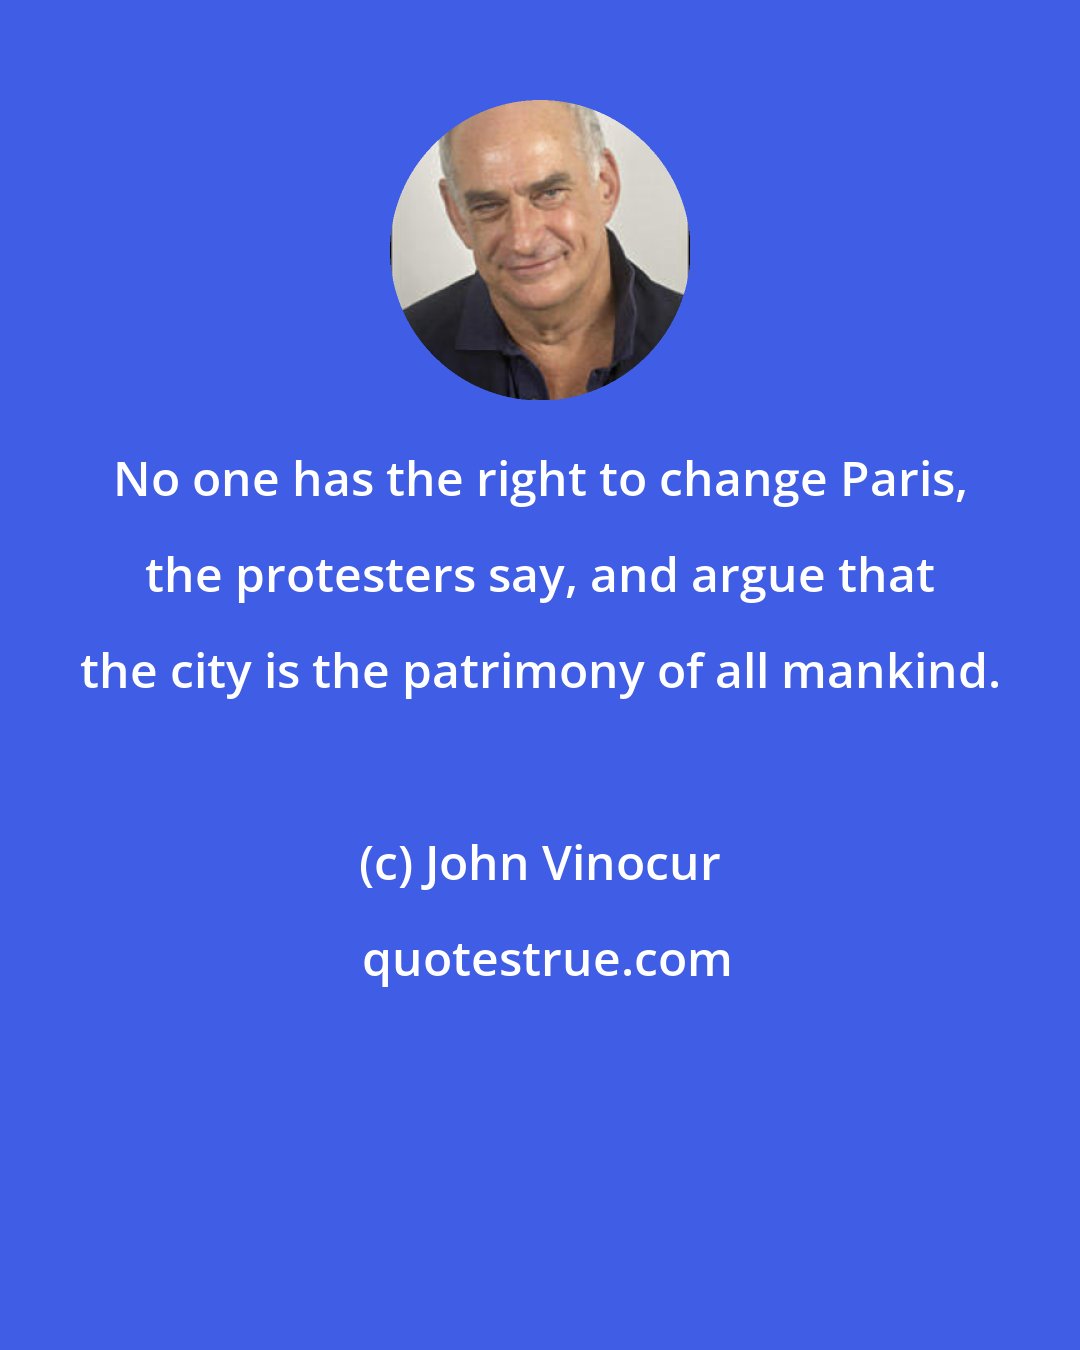 John Vinocur: No one has the right to change Paris, the protesters say, and argue that the city is the patrimony of all mankind.